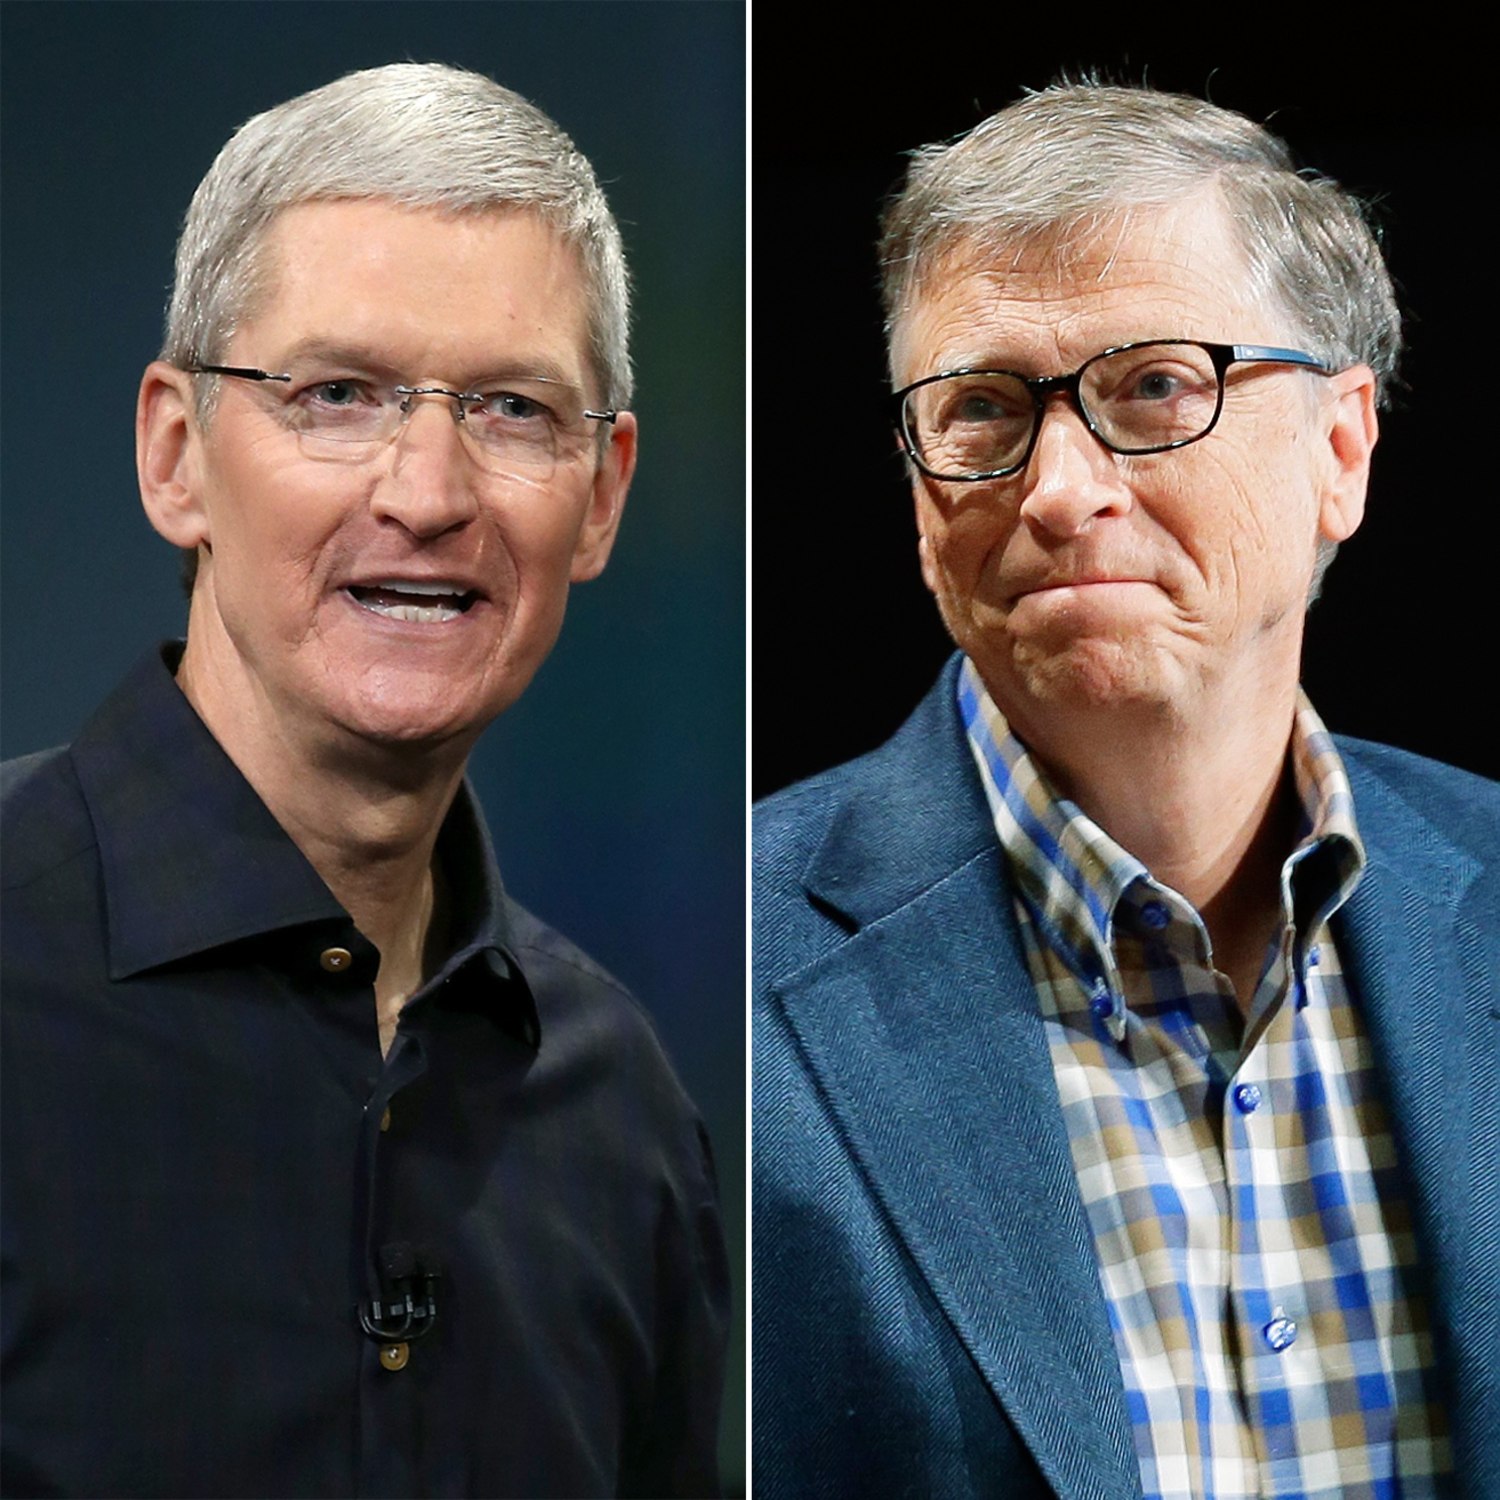 Paradox Grand Strategy: Tim Cook? How many divisions has he got